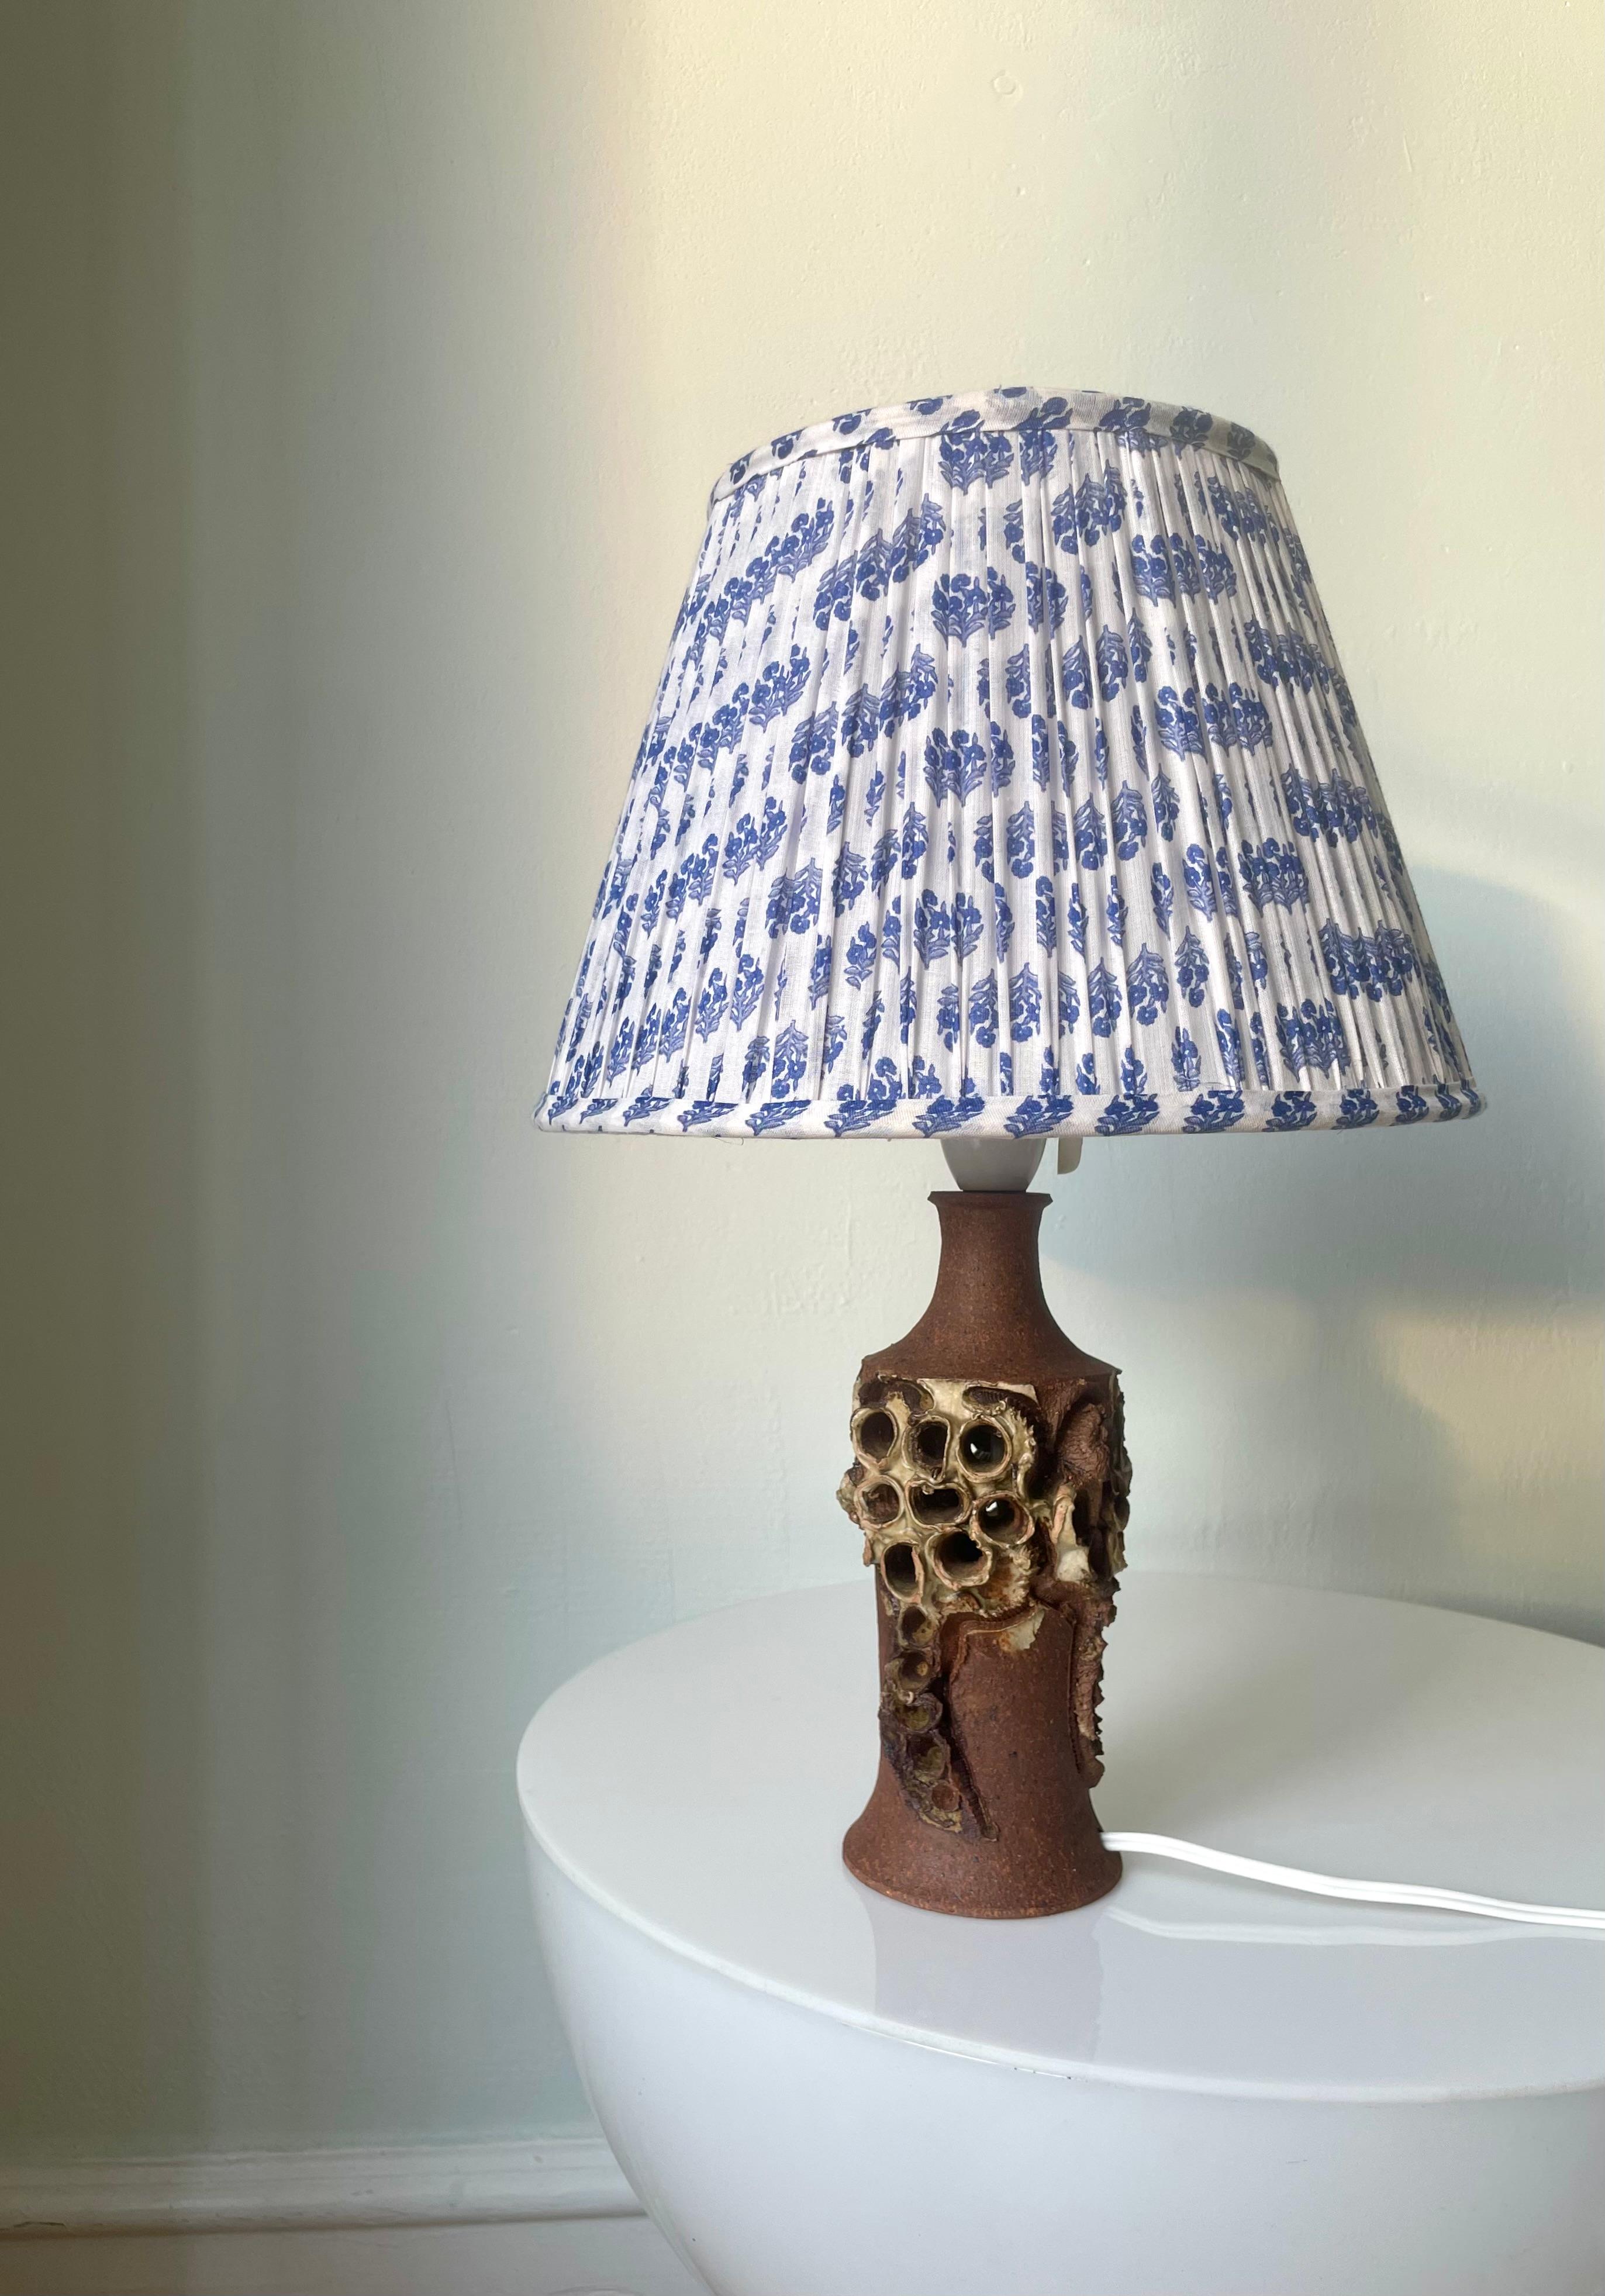 Unique Danish Expressionist stoneware table lamp handmade by experimental ceramic artist Bodil Marie Nielsen in the 1960s. Latte colored glaze mixed in with the raw terracotta clay decorated with Nielsen's signature brutalist organic shapes and